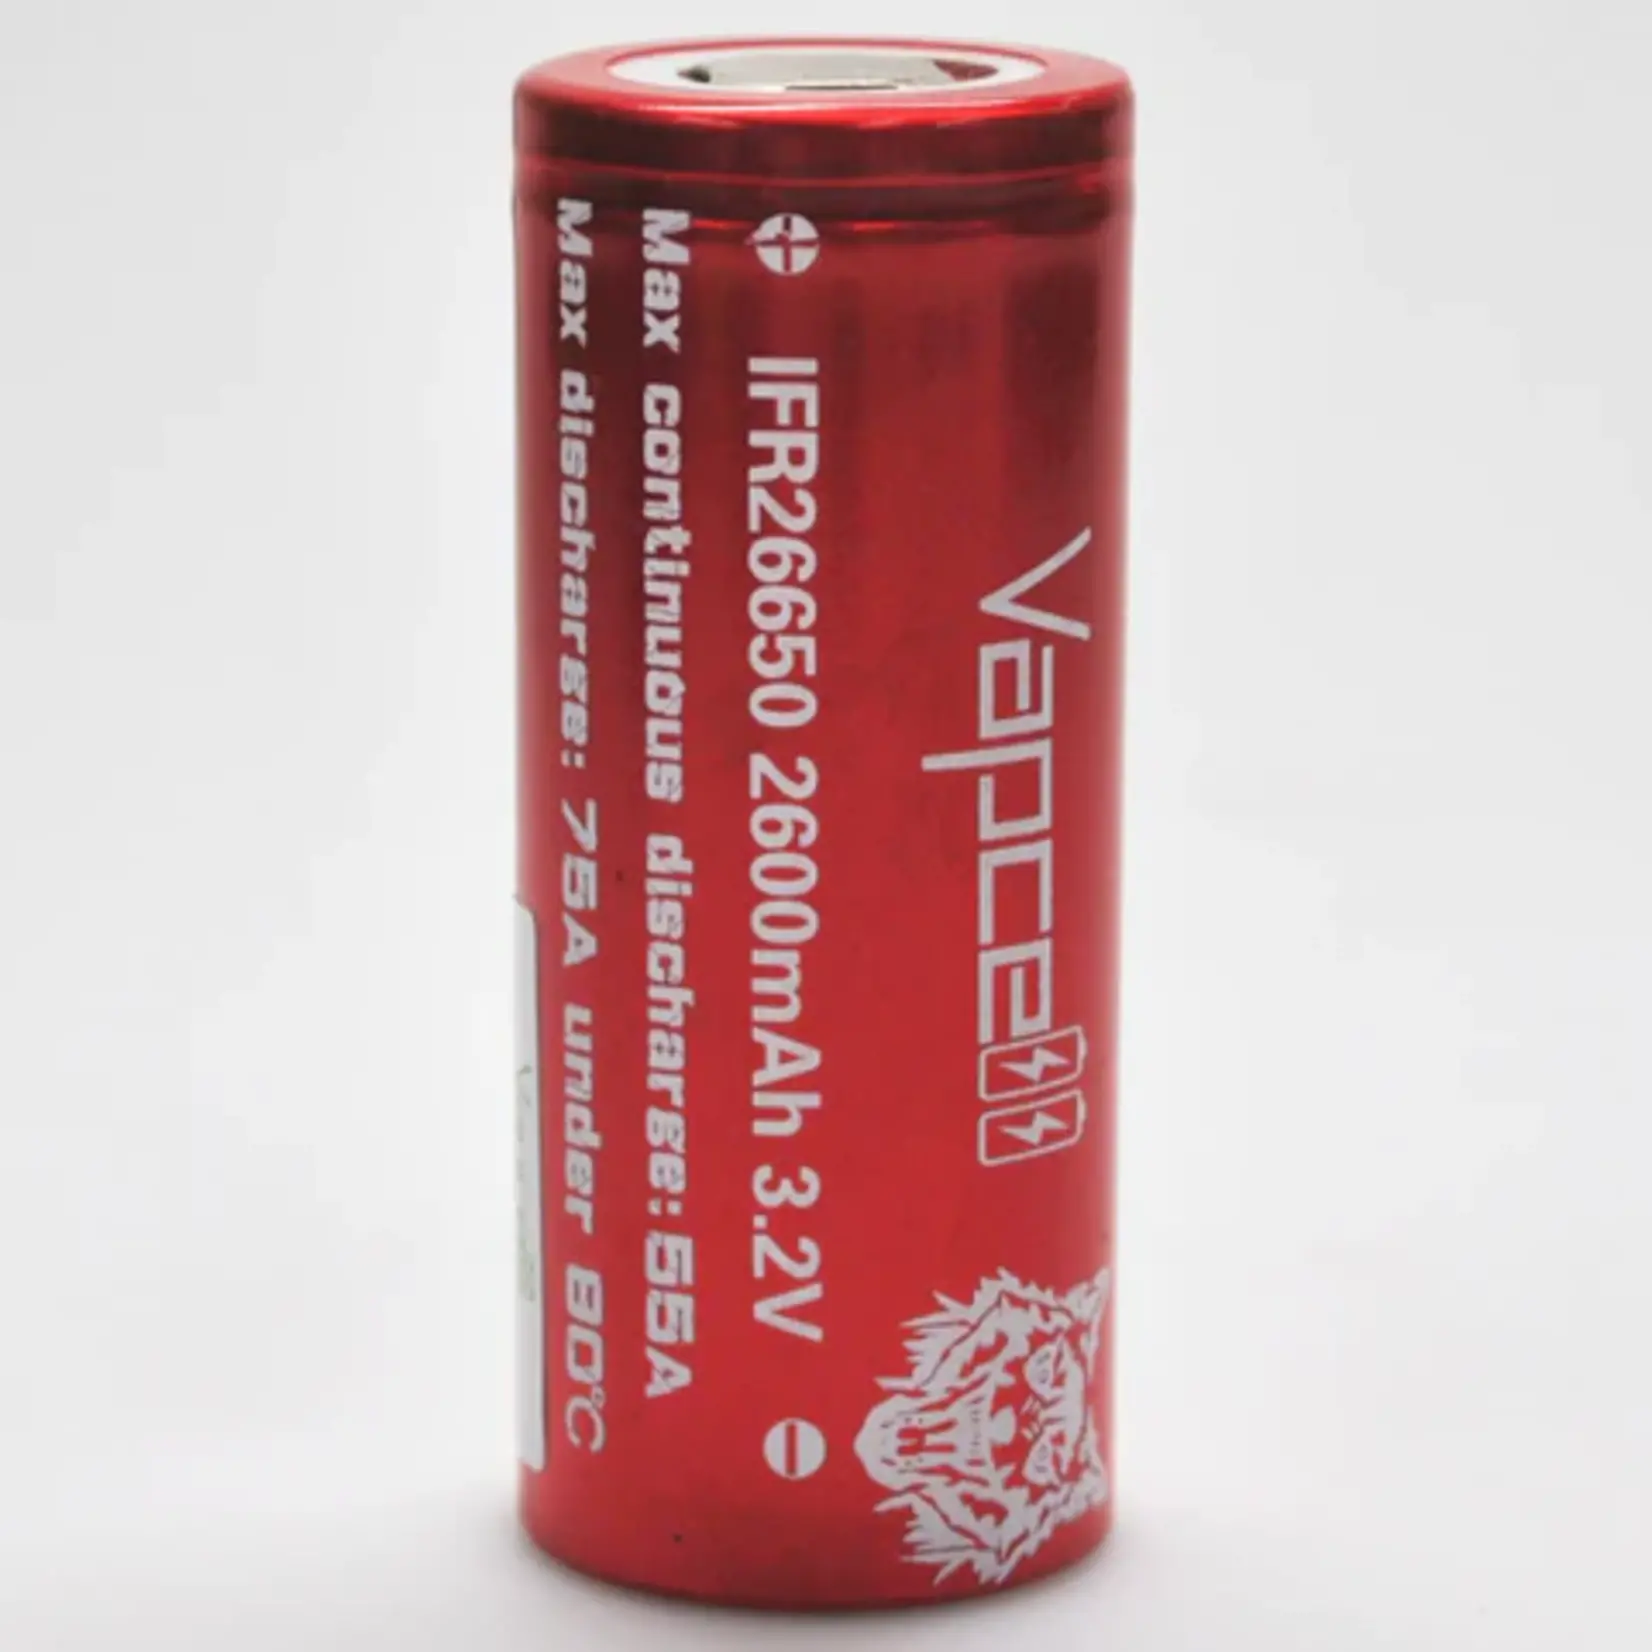 Vapcell LiFePO4 IFR 26650 55A/75A Flat Top 2600mAh Battery